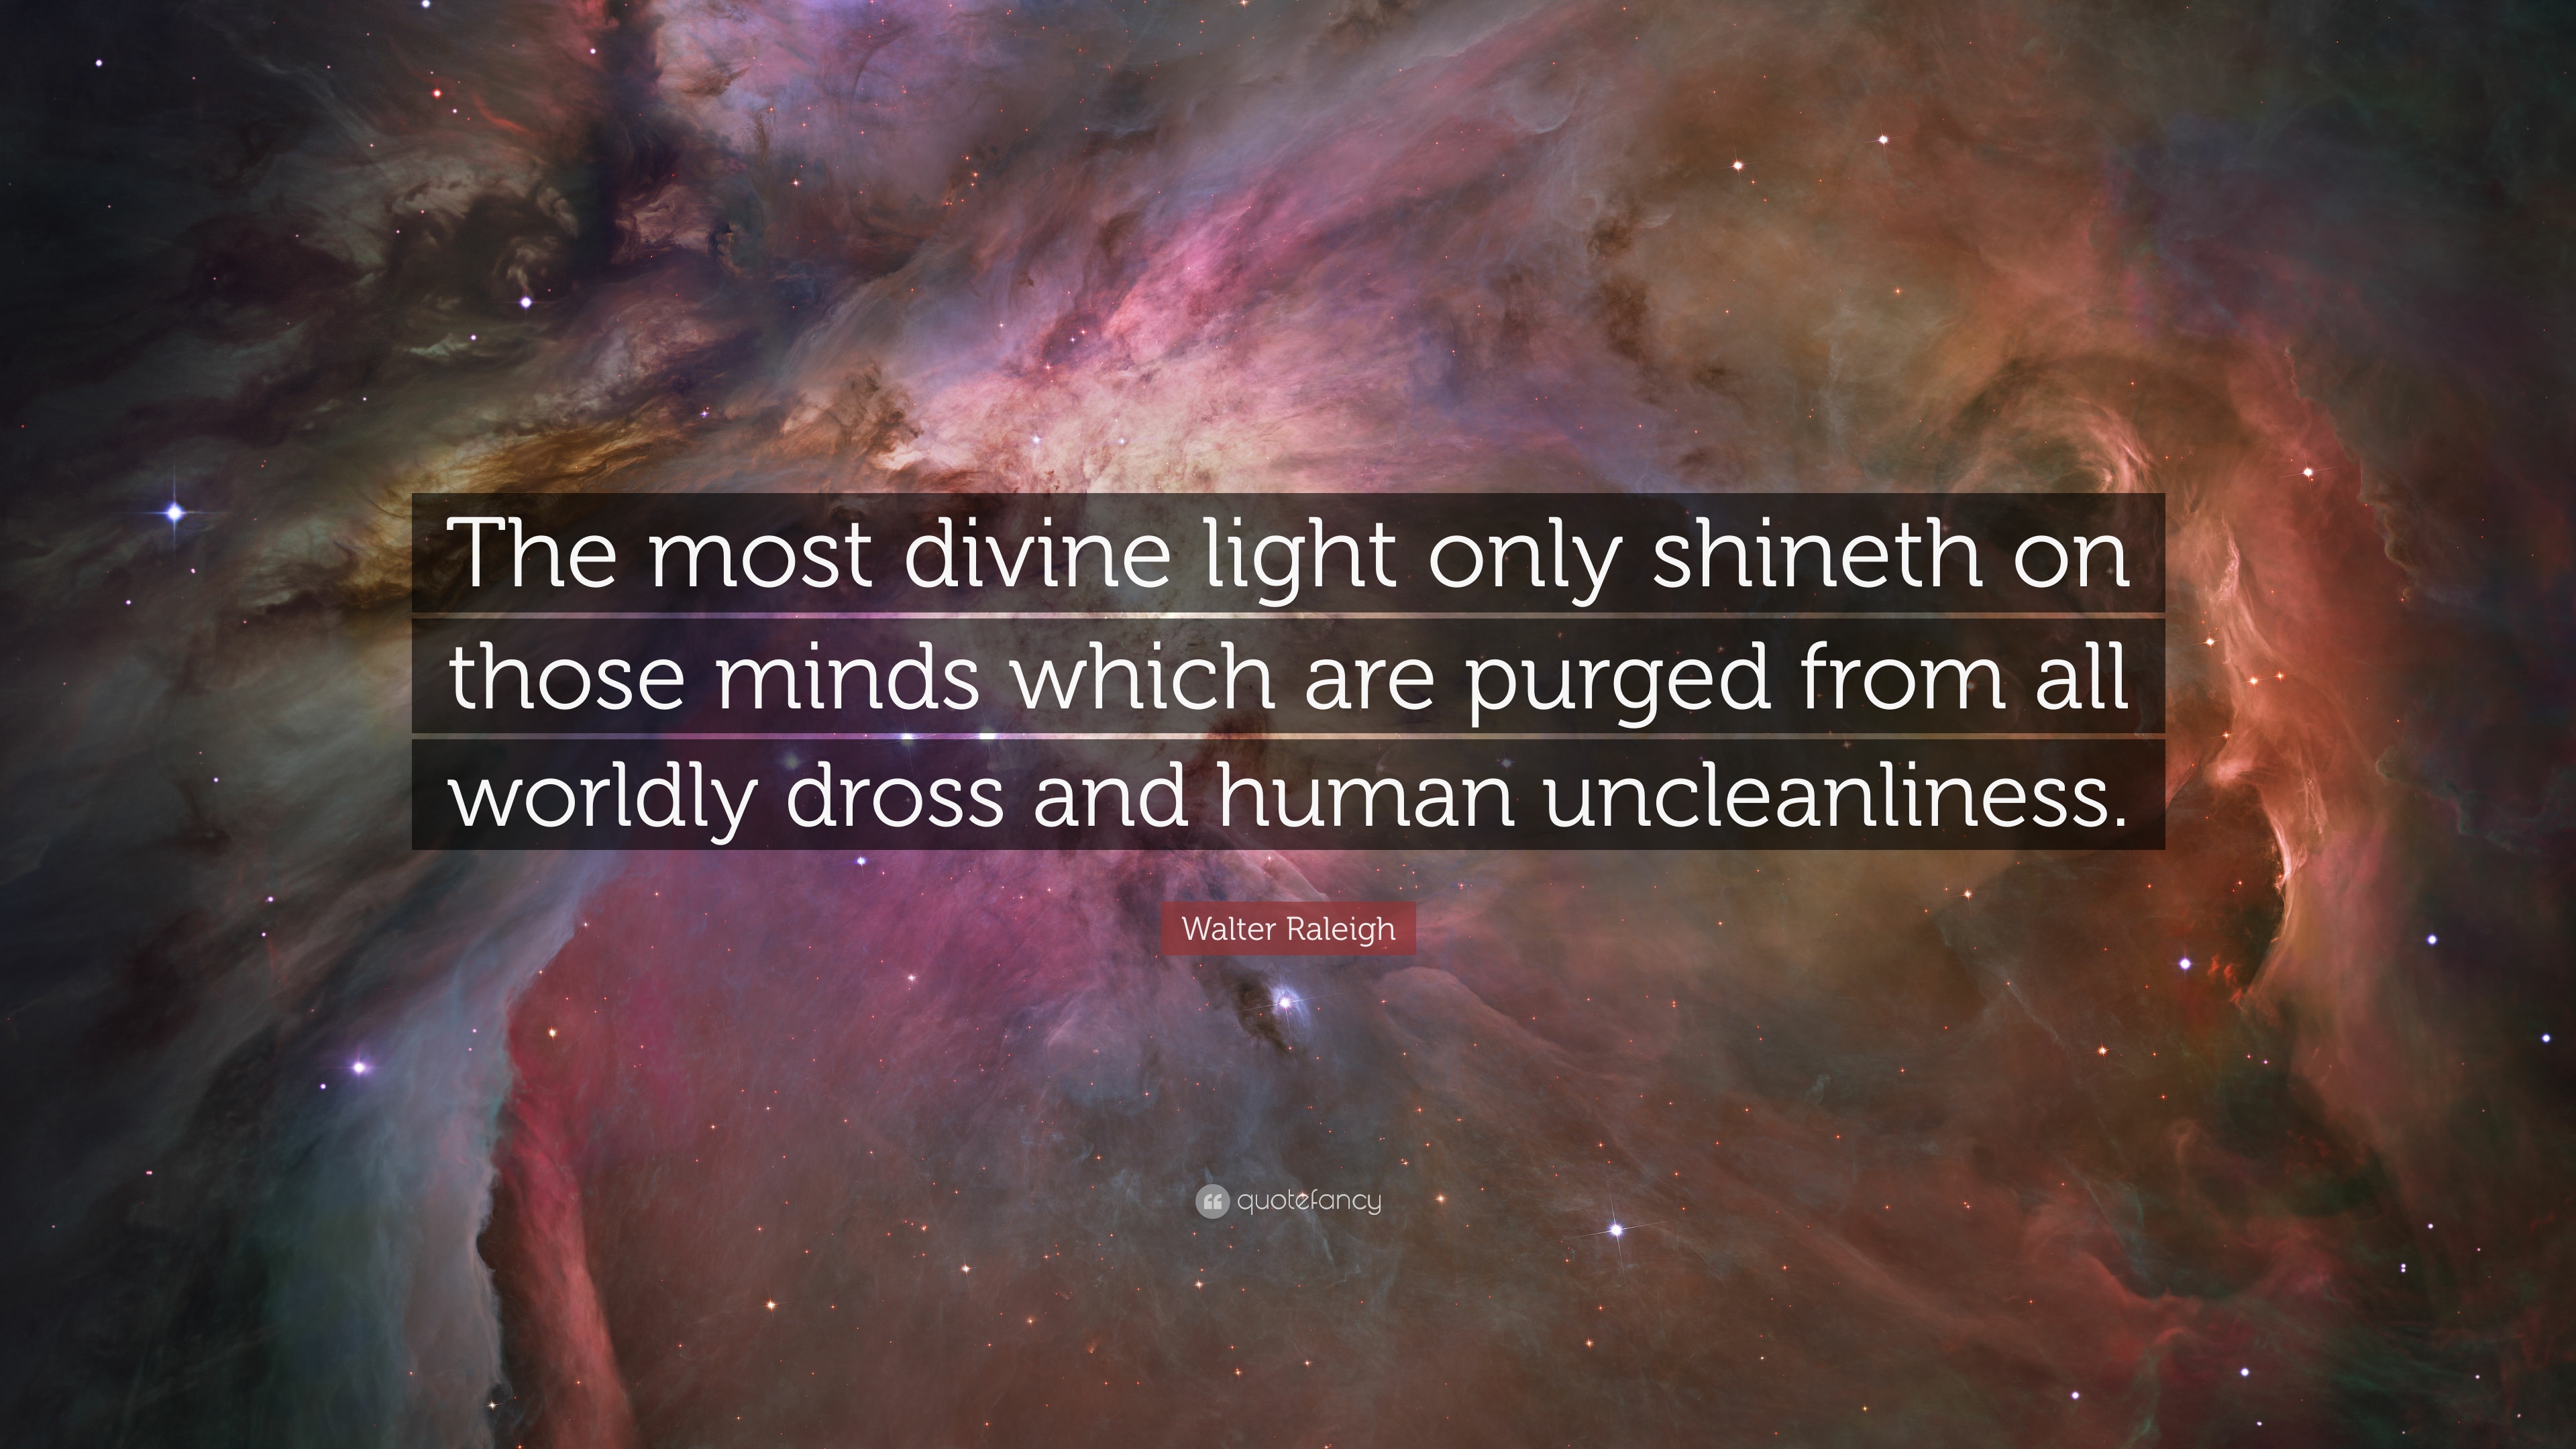 Walter Raleigh Quote: “The most divine light only shineth